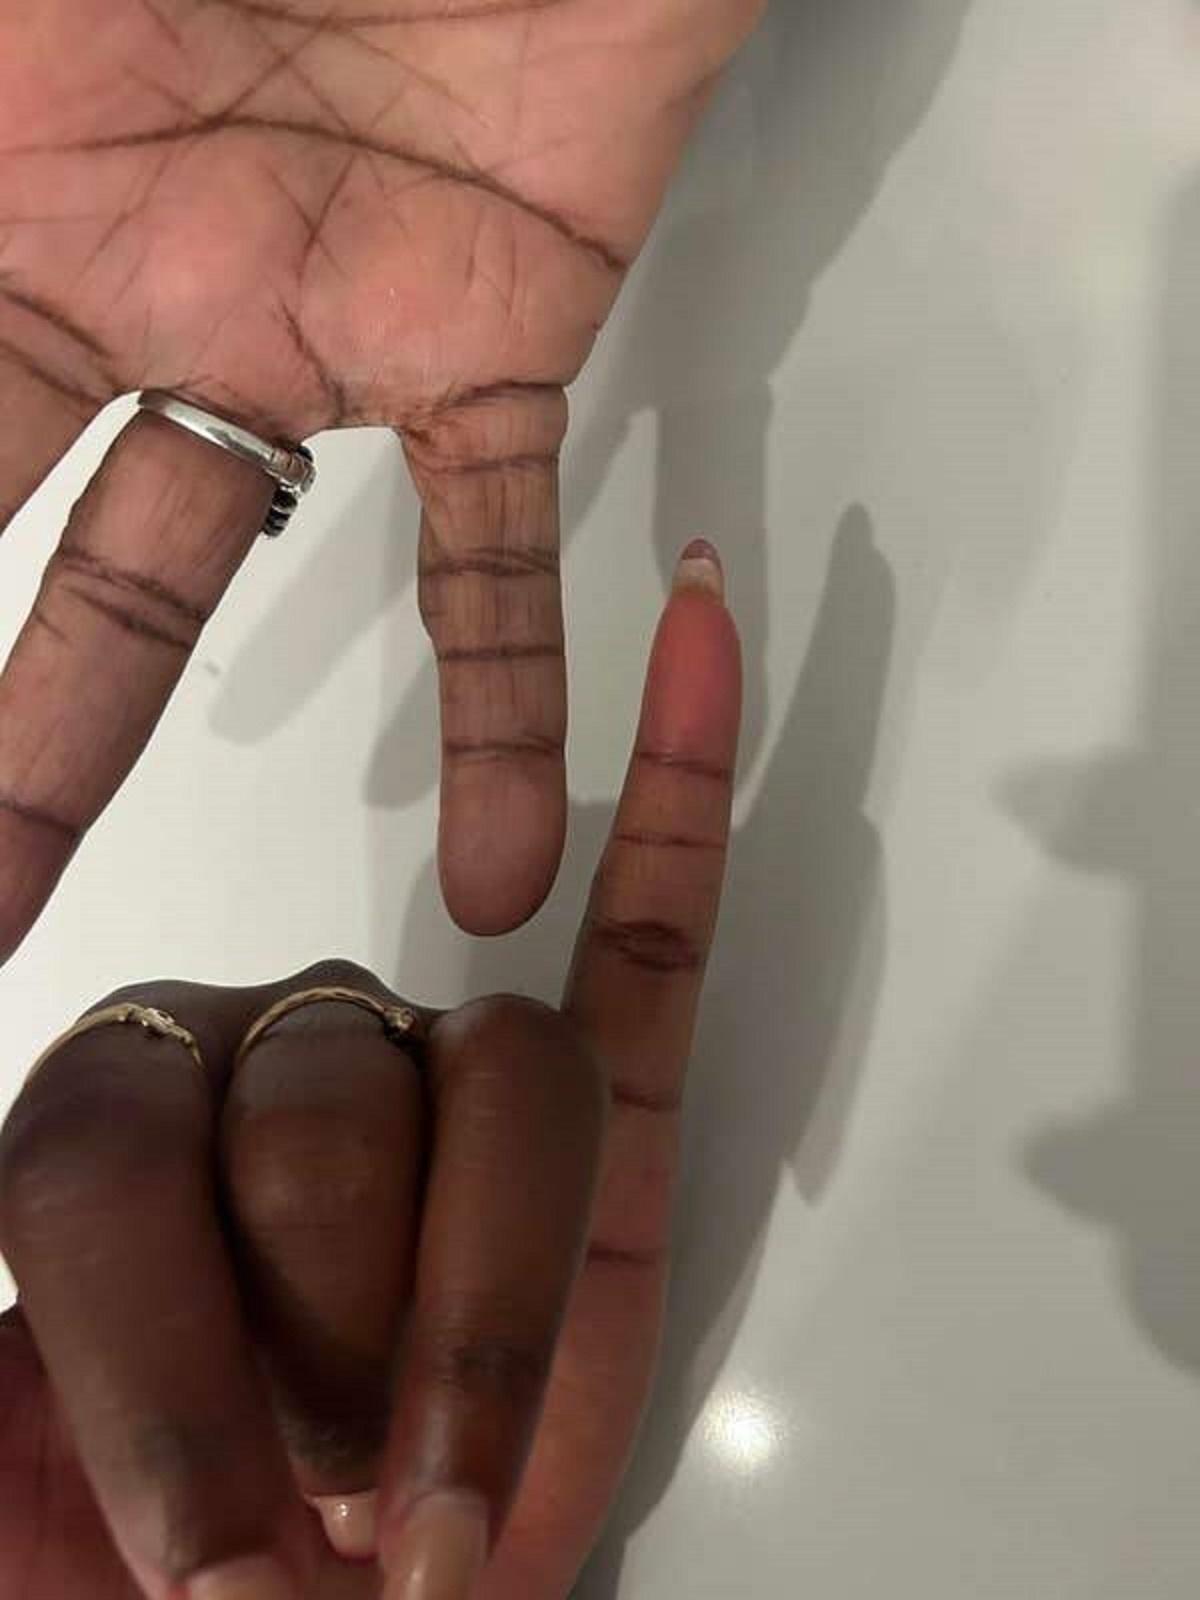 Some people have extra lines on their pinkies: